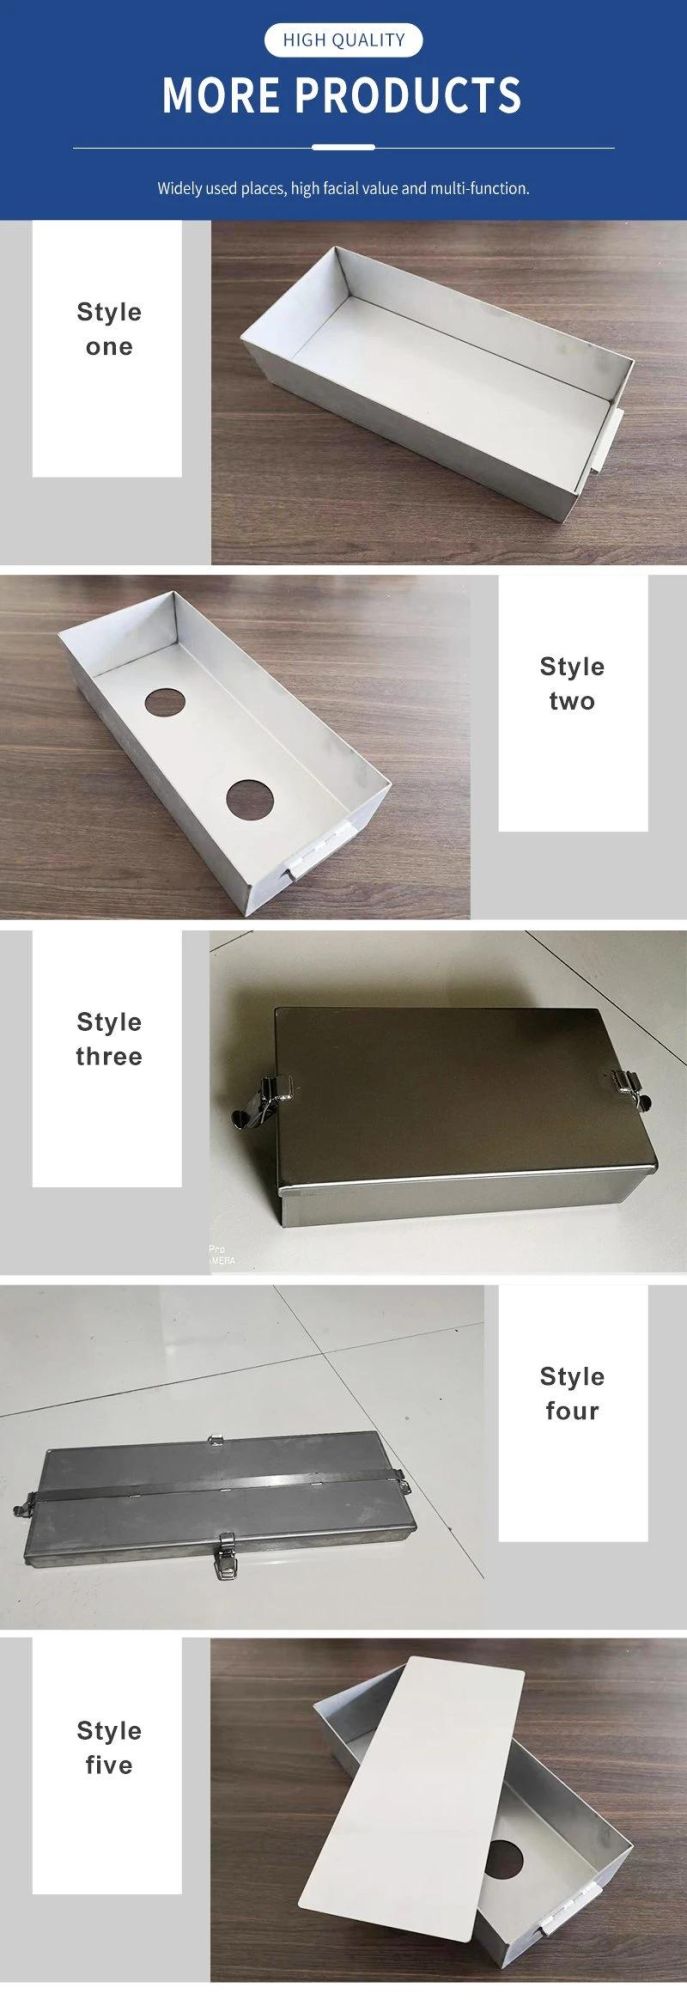 Factory High Quality Storage Box Mold at Factory Price